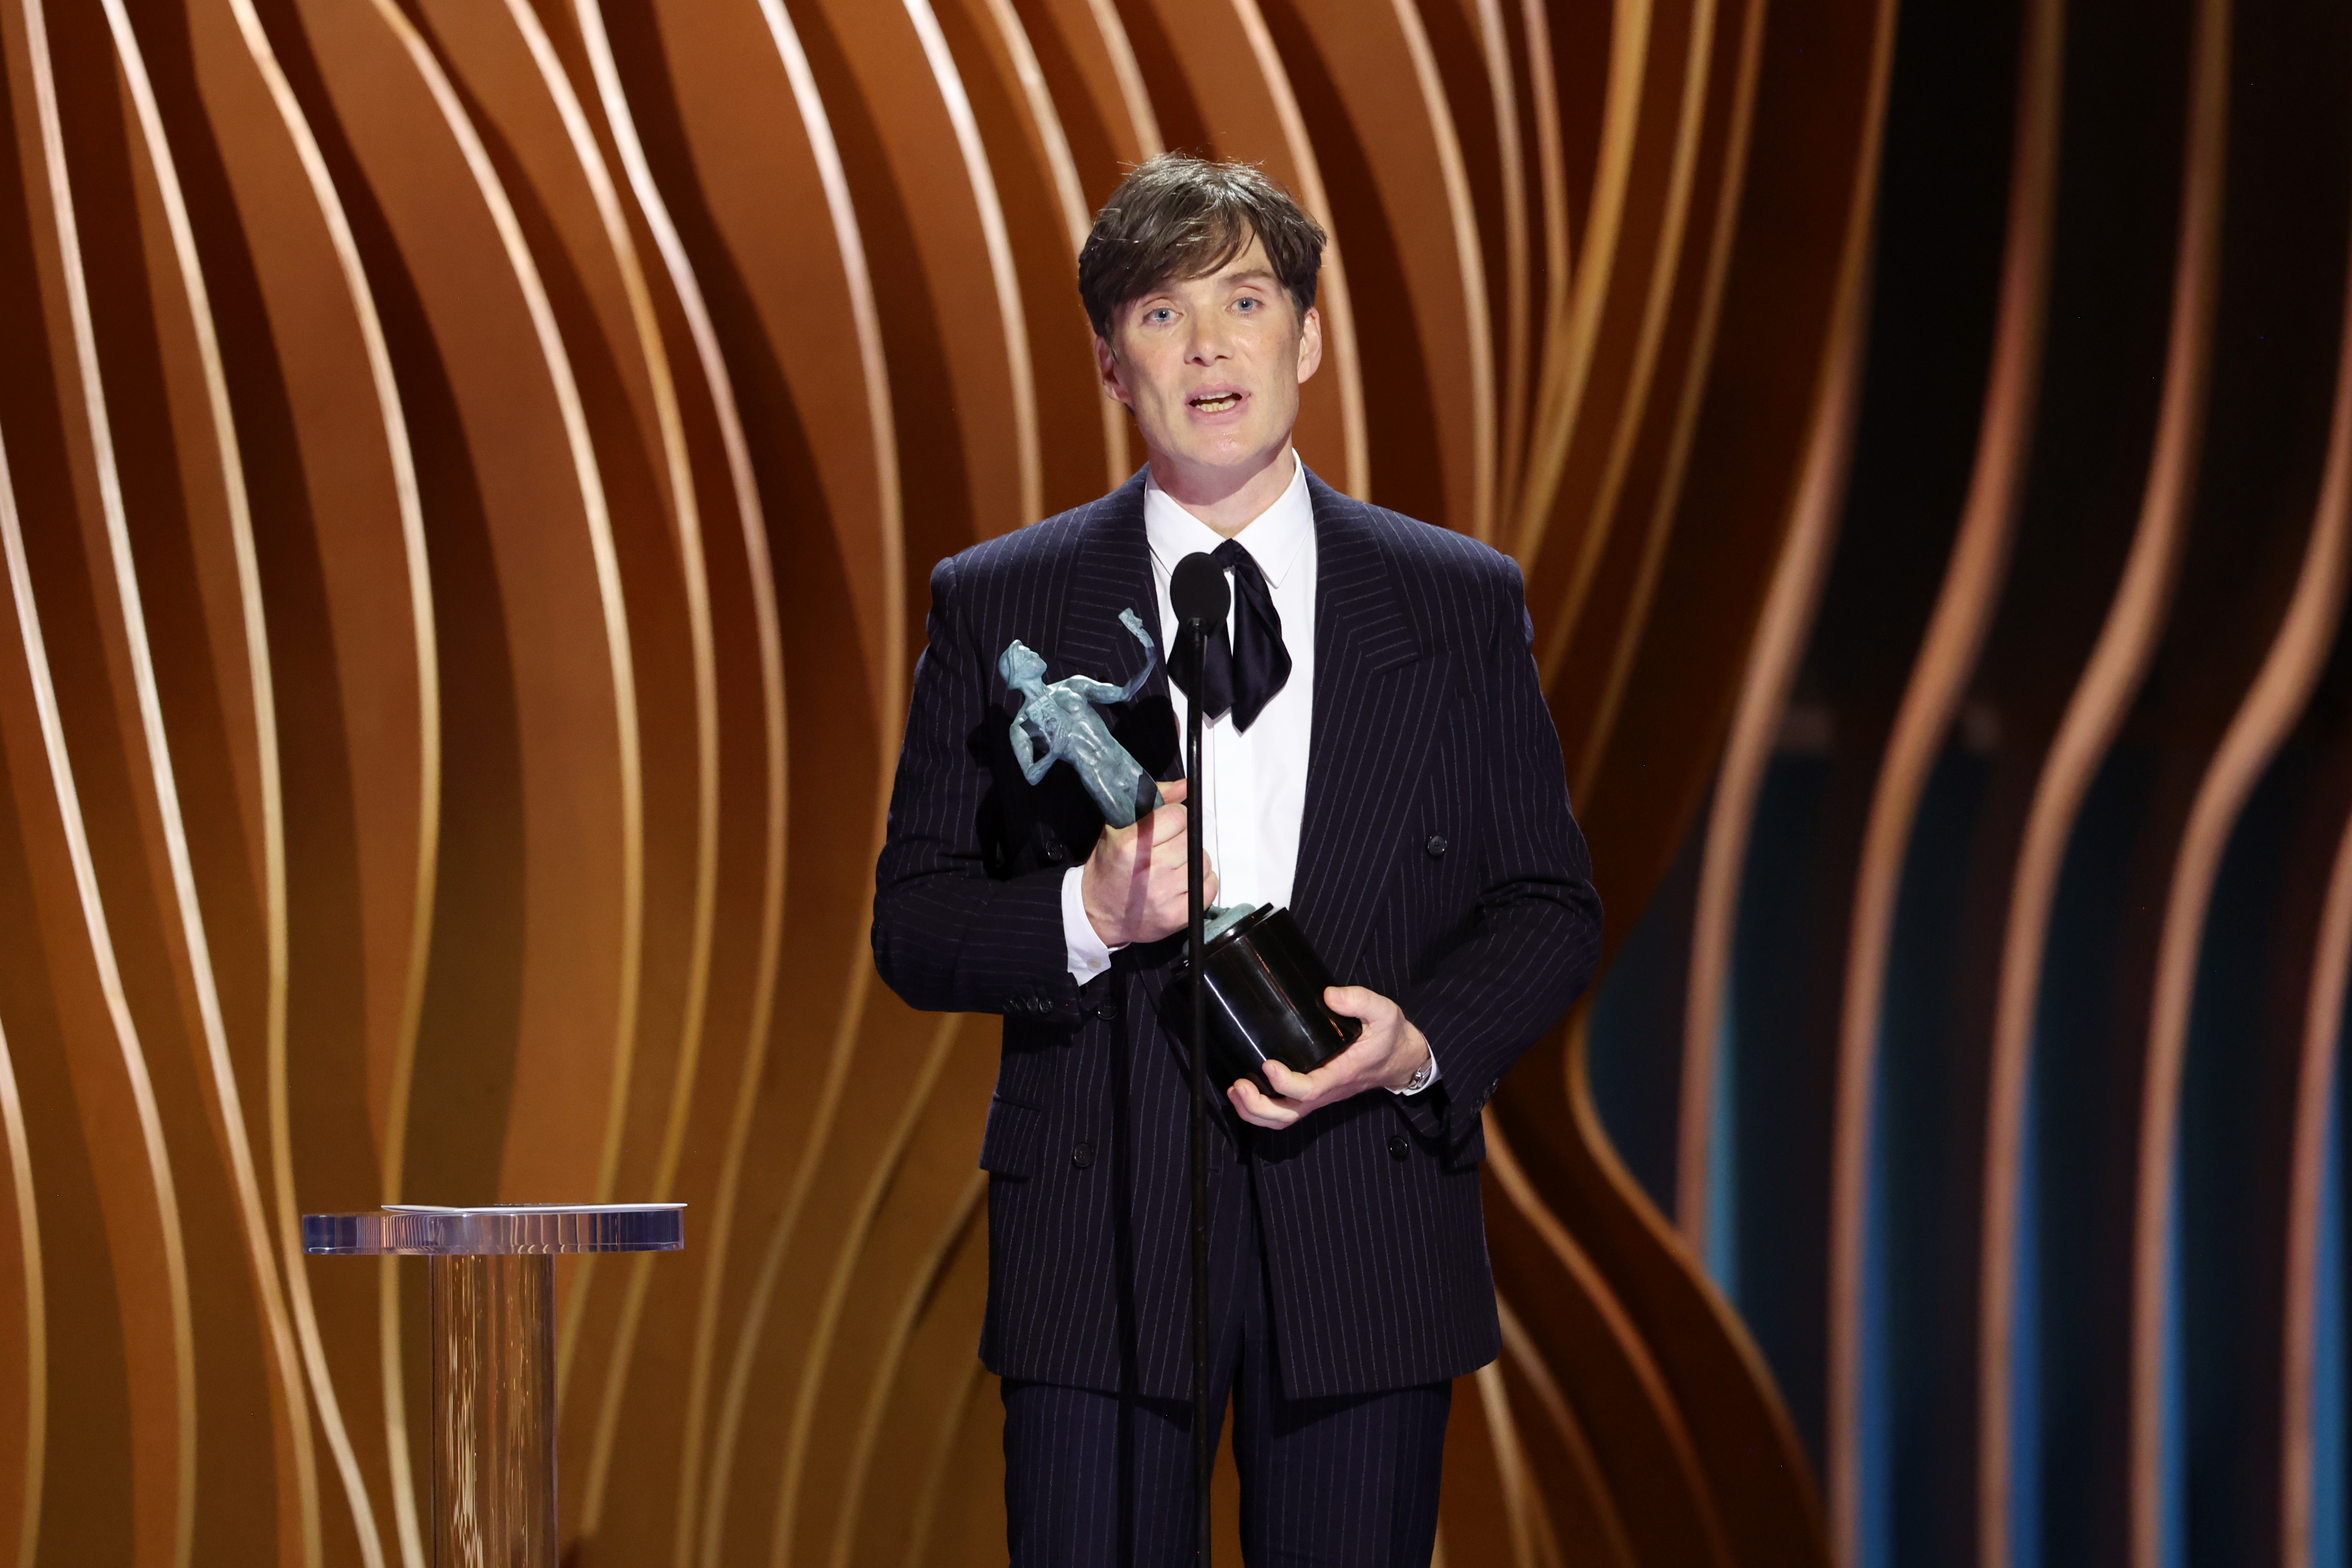 Cillian Murphy accepts the Outstanding Performance by a Male Actor in a Leading Role award for “Oppenheimer” at the 30th Annual Screen Actors Guild Awards on February 24, 2024 in Los Angeles, California | Source: Getty Images